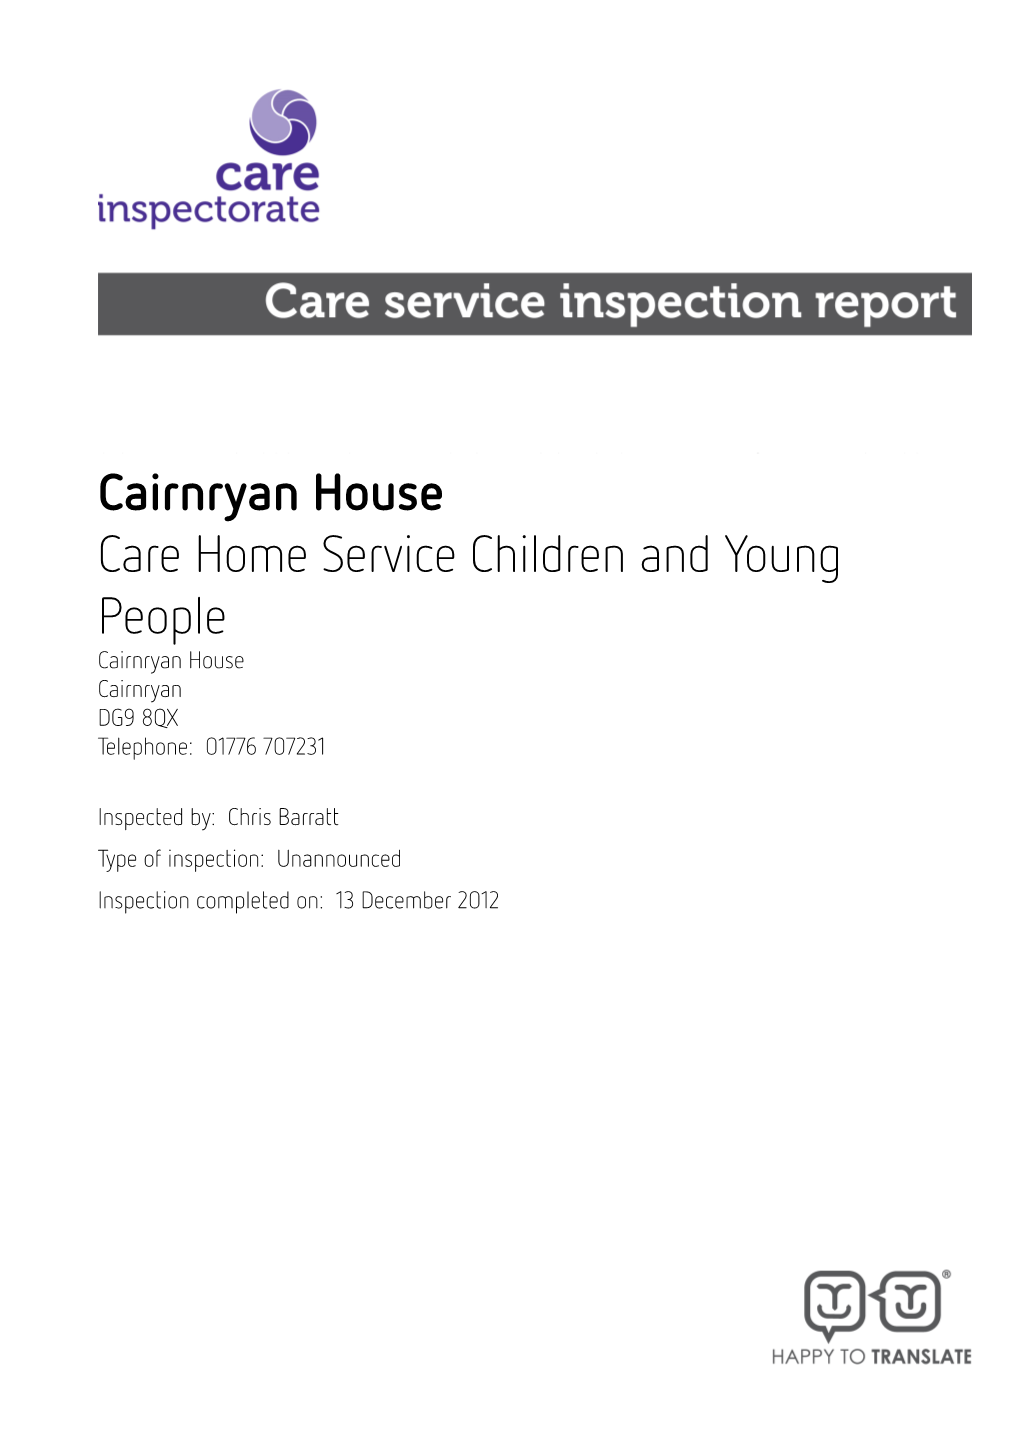 Cairnryan House Care Home Service Children and Young People Cairnryan House Cairnryan DG9 8QX Telephone: 01776 707231